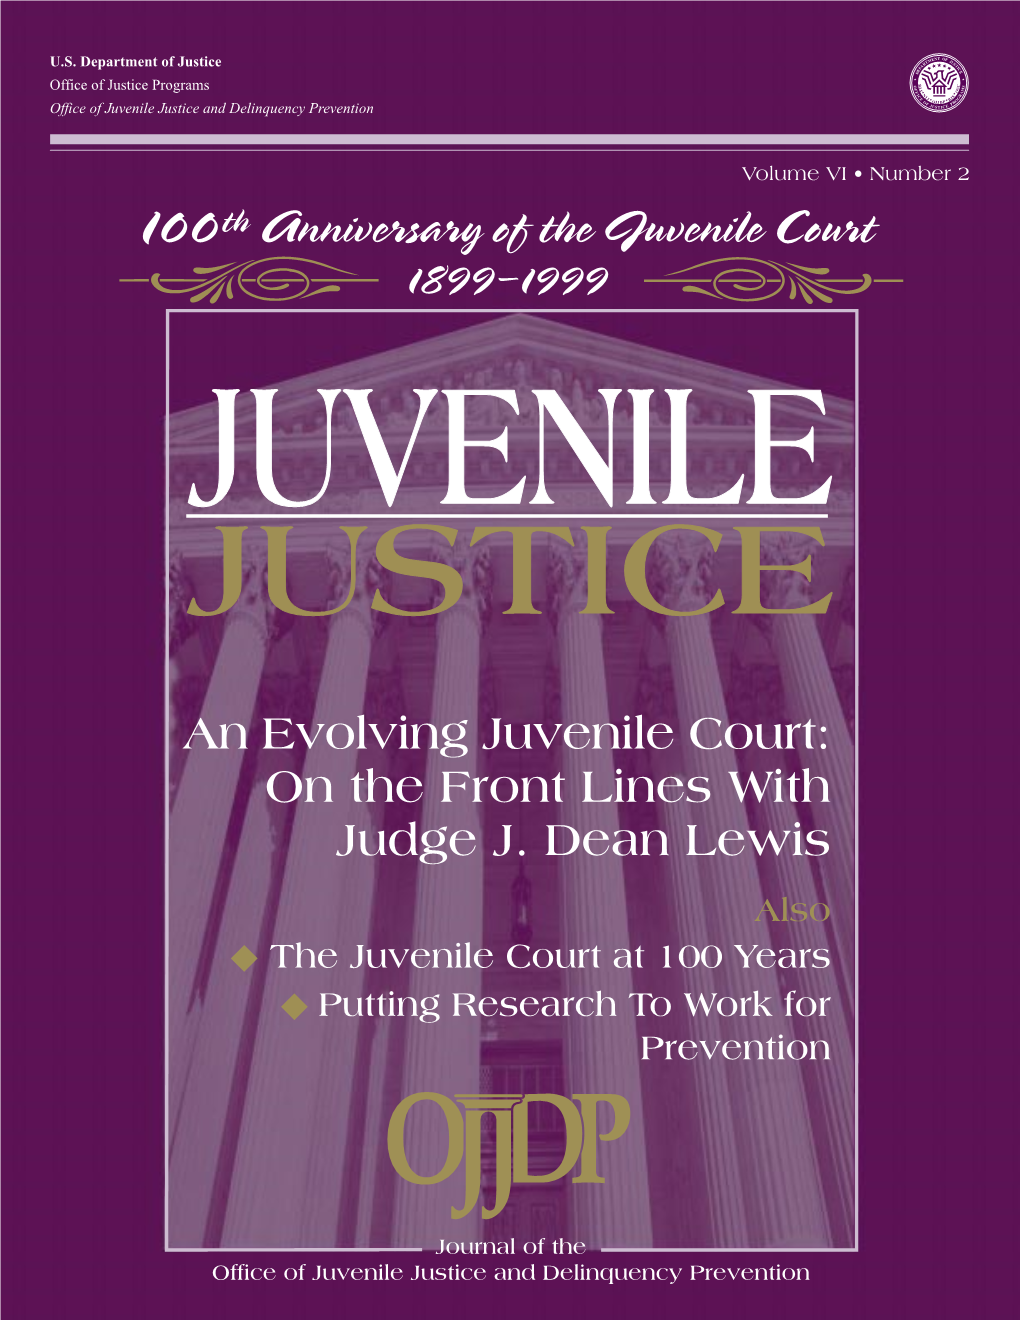 The Juvenile Court at 100 Years ◆ Putting Research to Work for Prevention from the Administrator